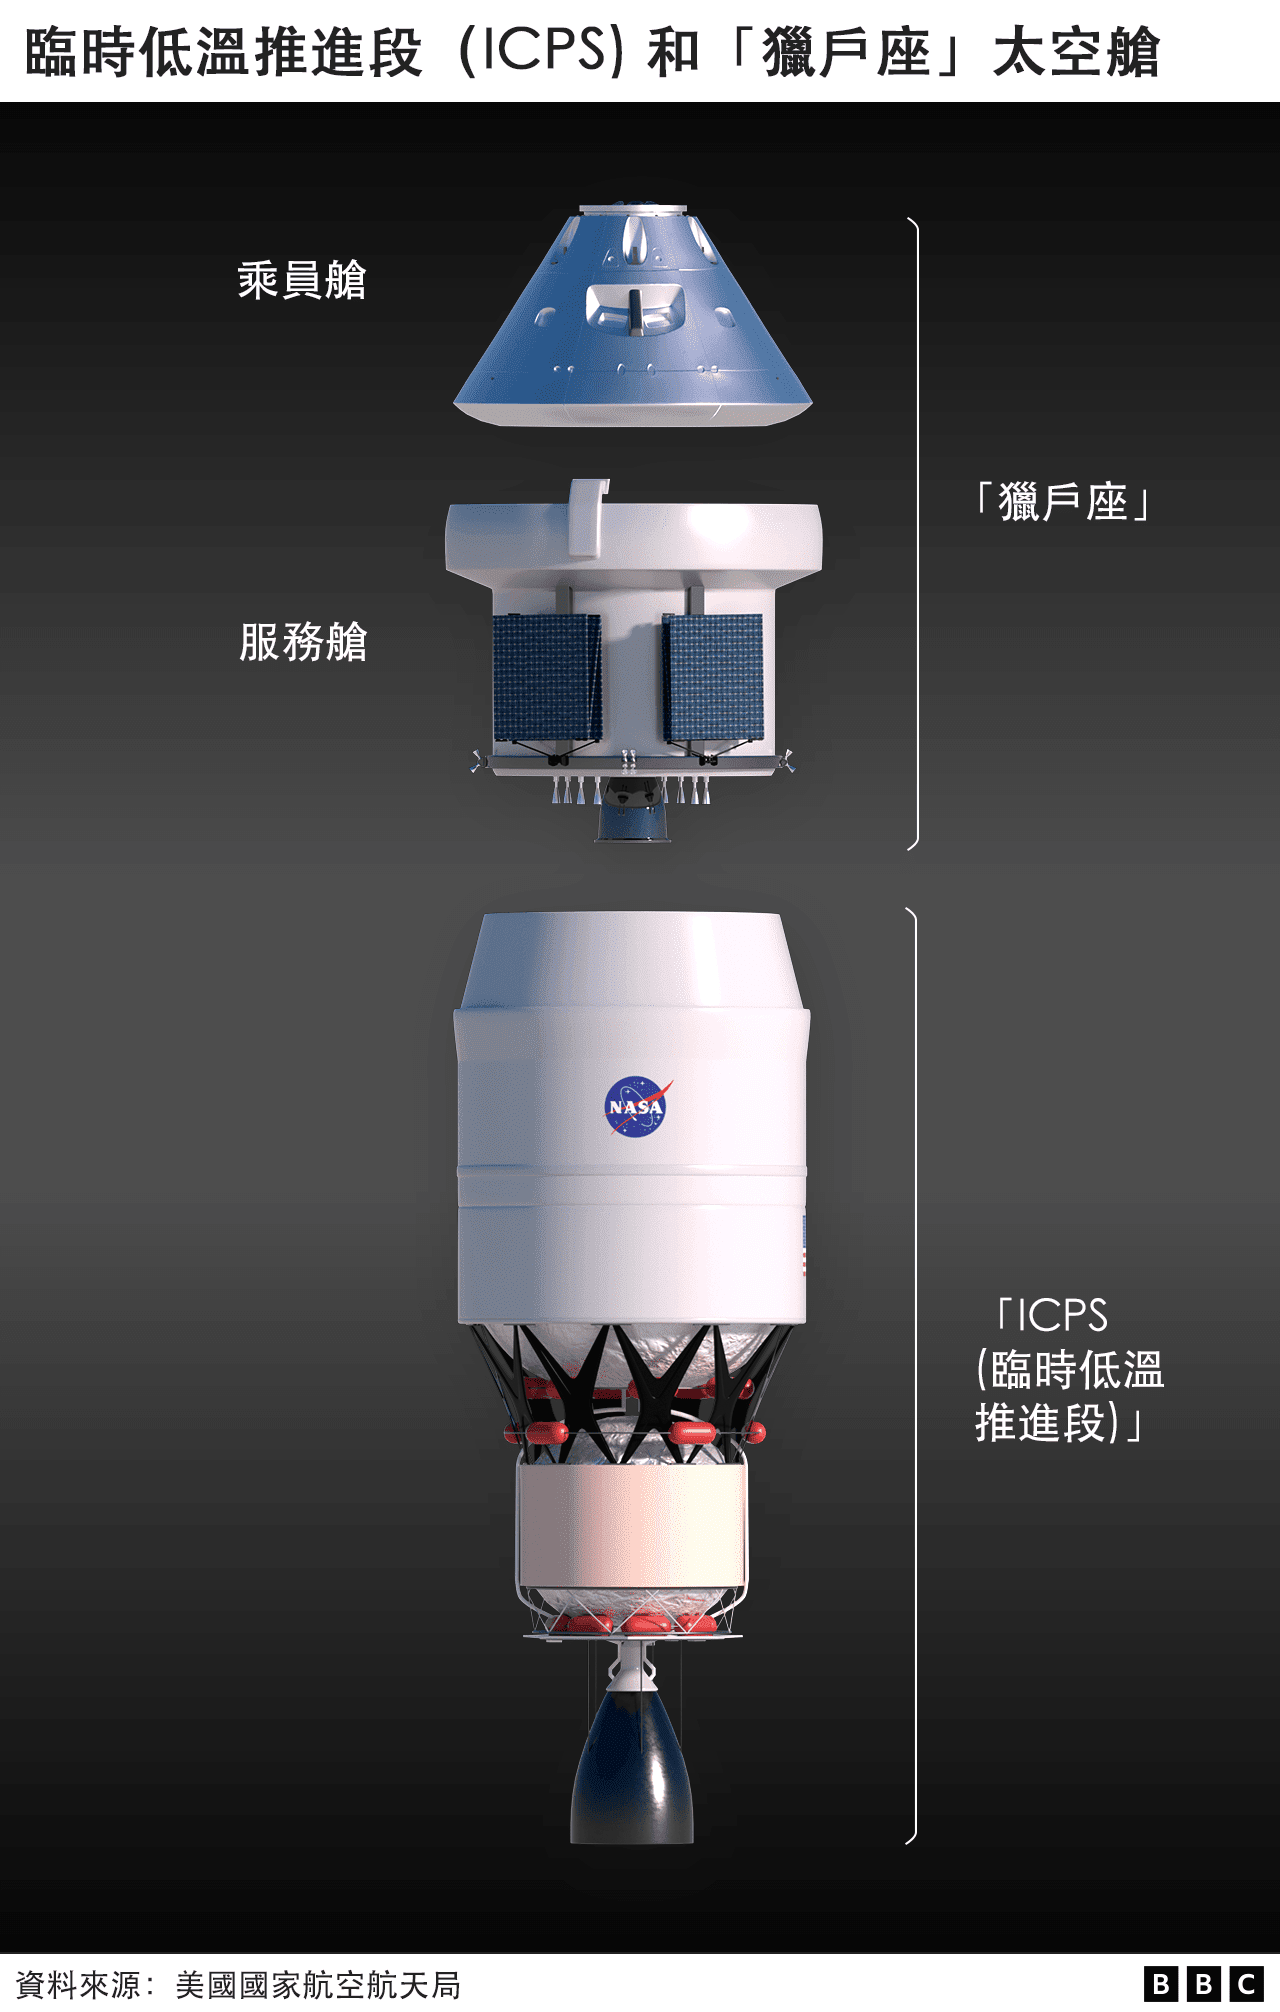 Temporary cryogenic propulsion stage and Orion test capsule